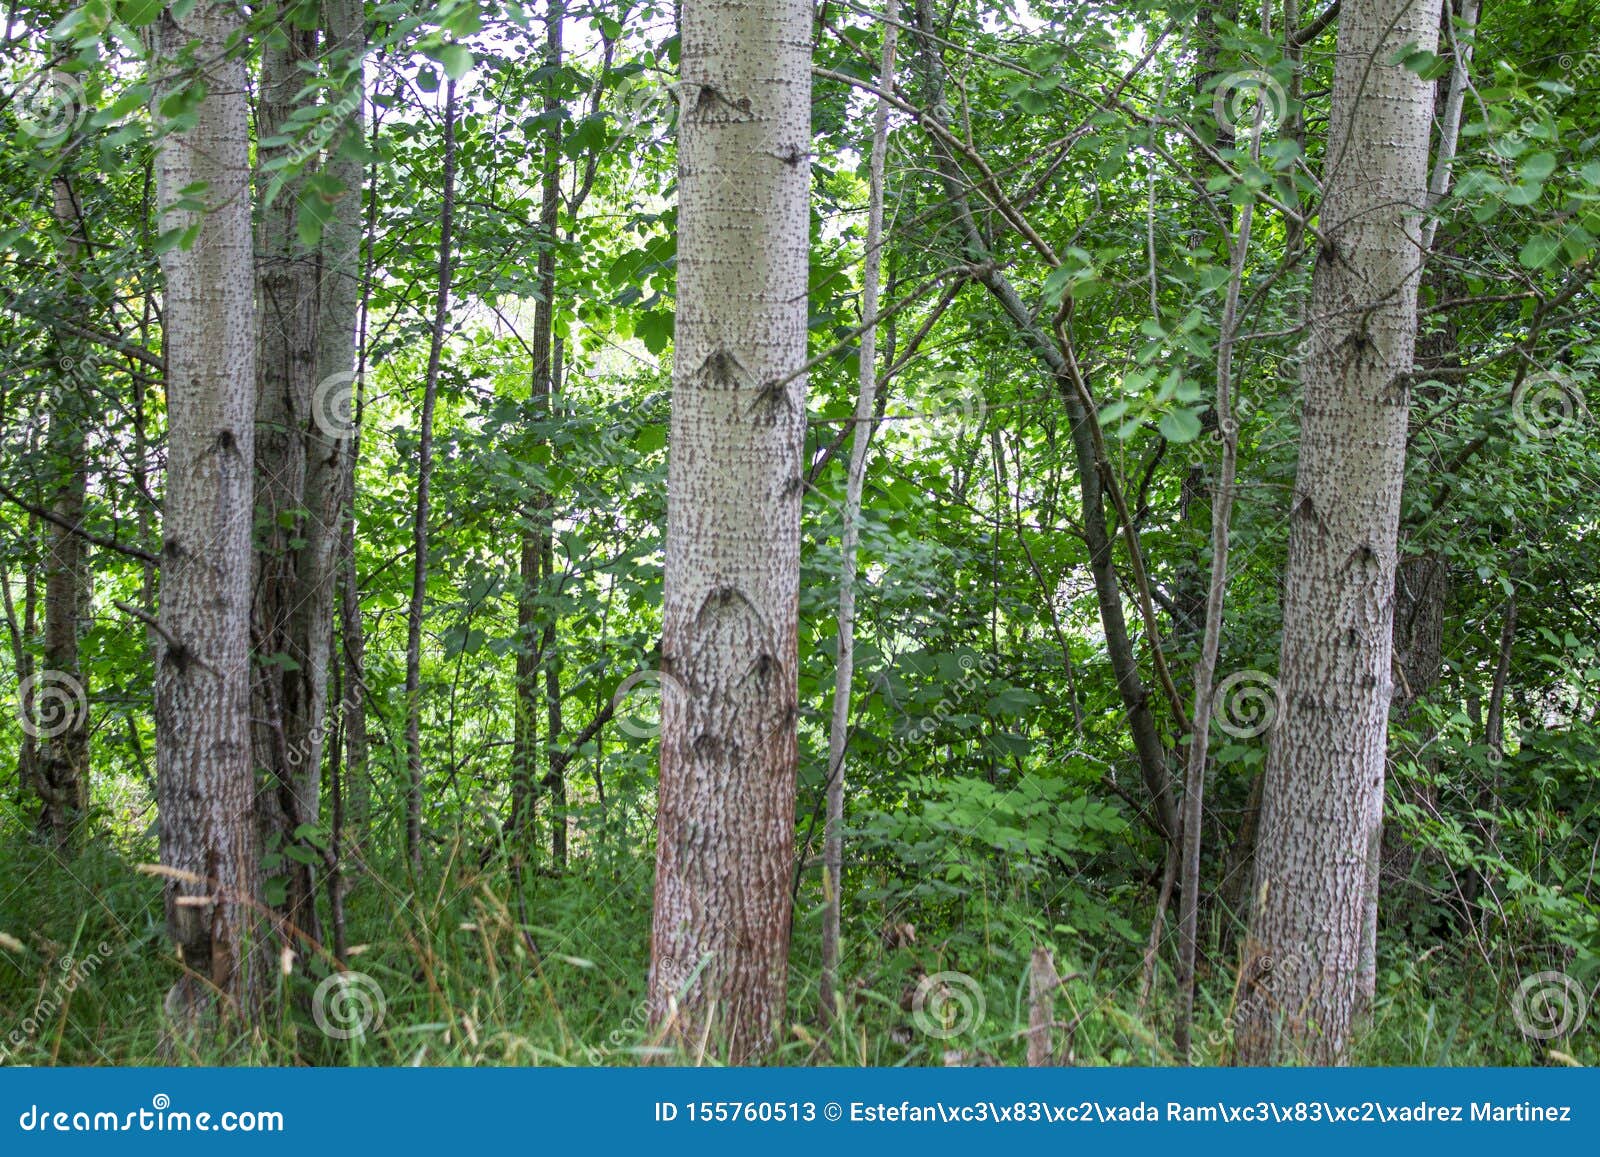 photography of a trunks and trees in a forest in skovde sweden.